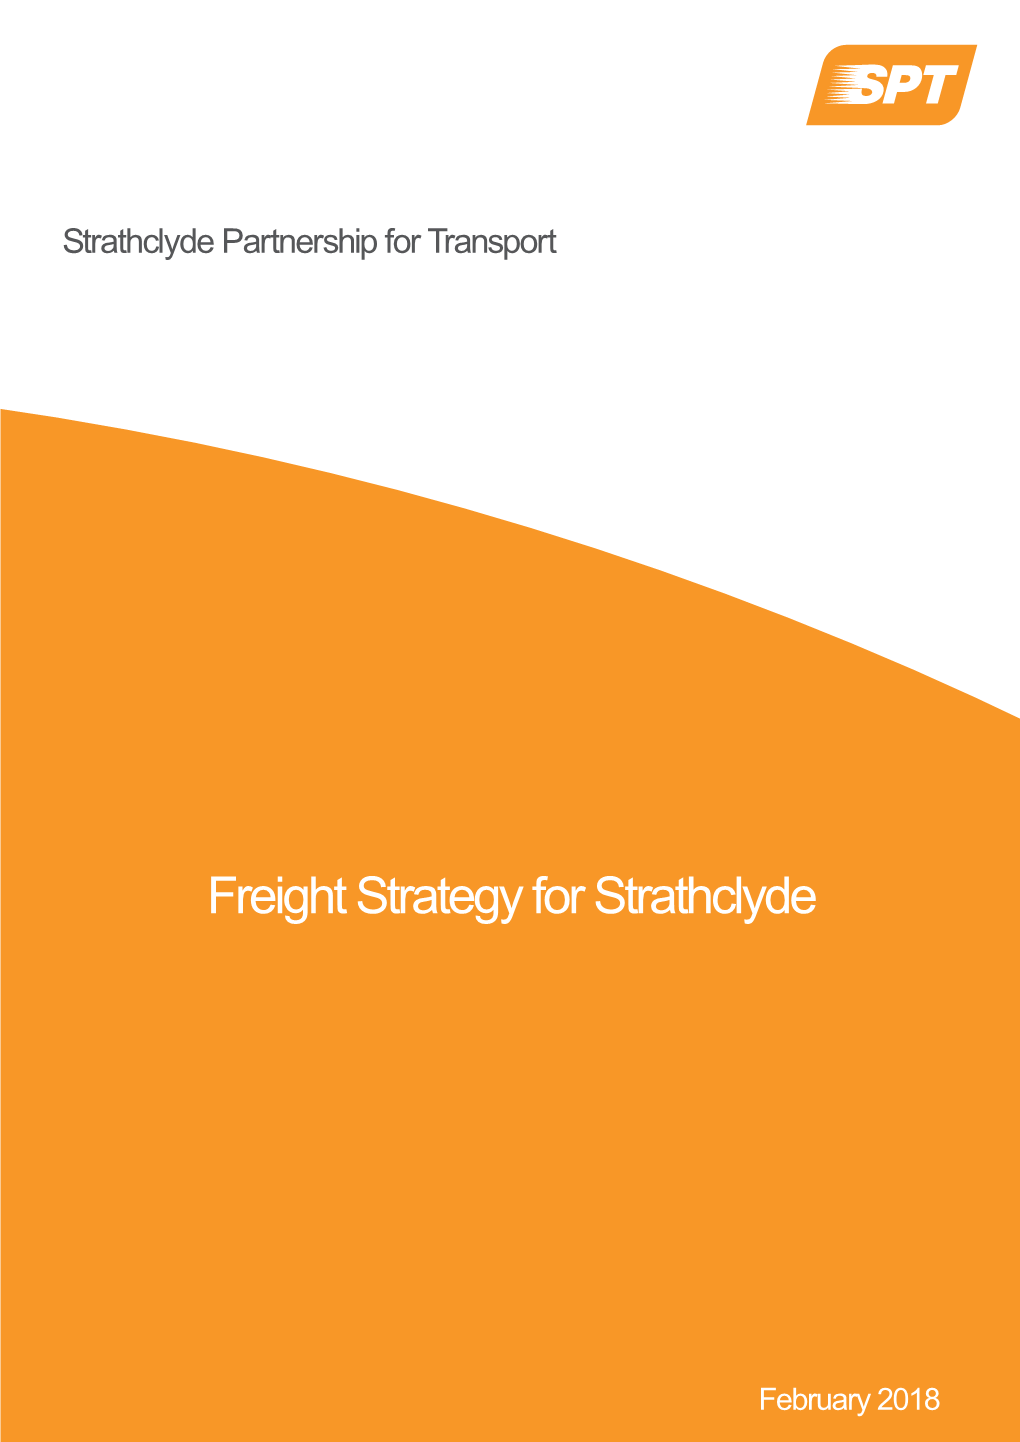 The Need for a Freight Strategy